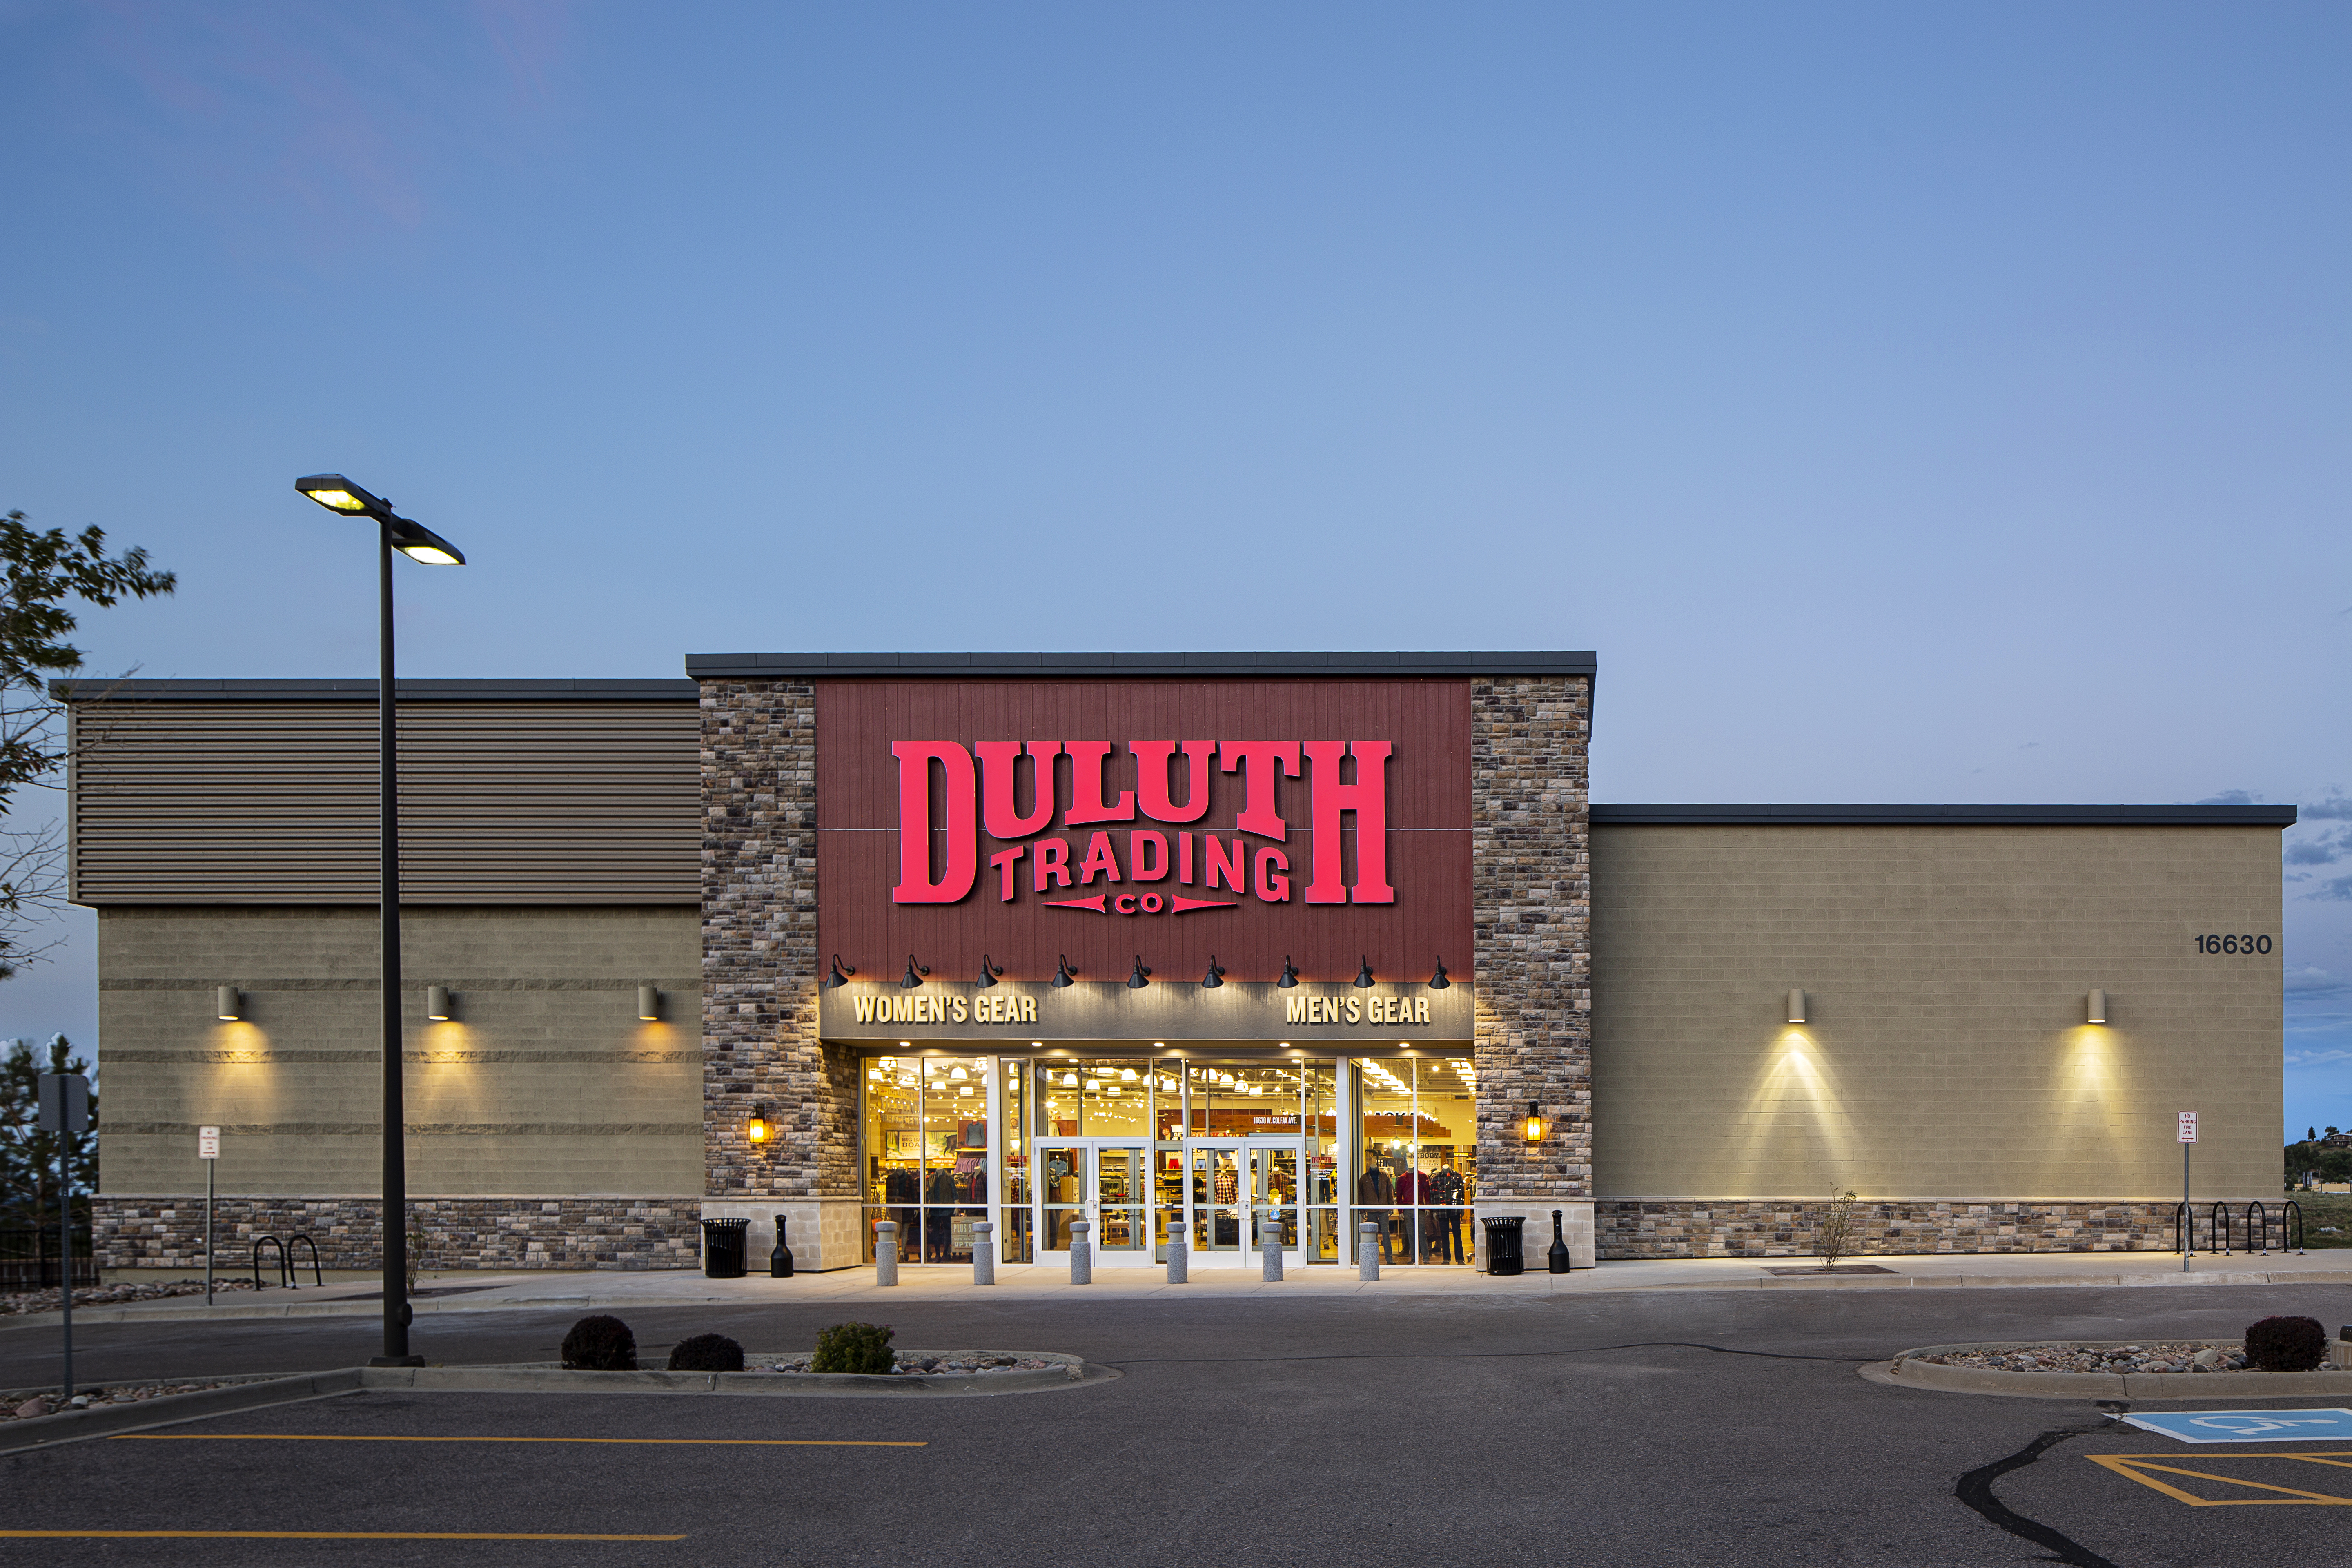 Duluth Trading Co. is moving west: Store for tradesmen, outdoor enthusiasts  will soon open in Colorado